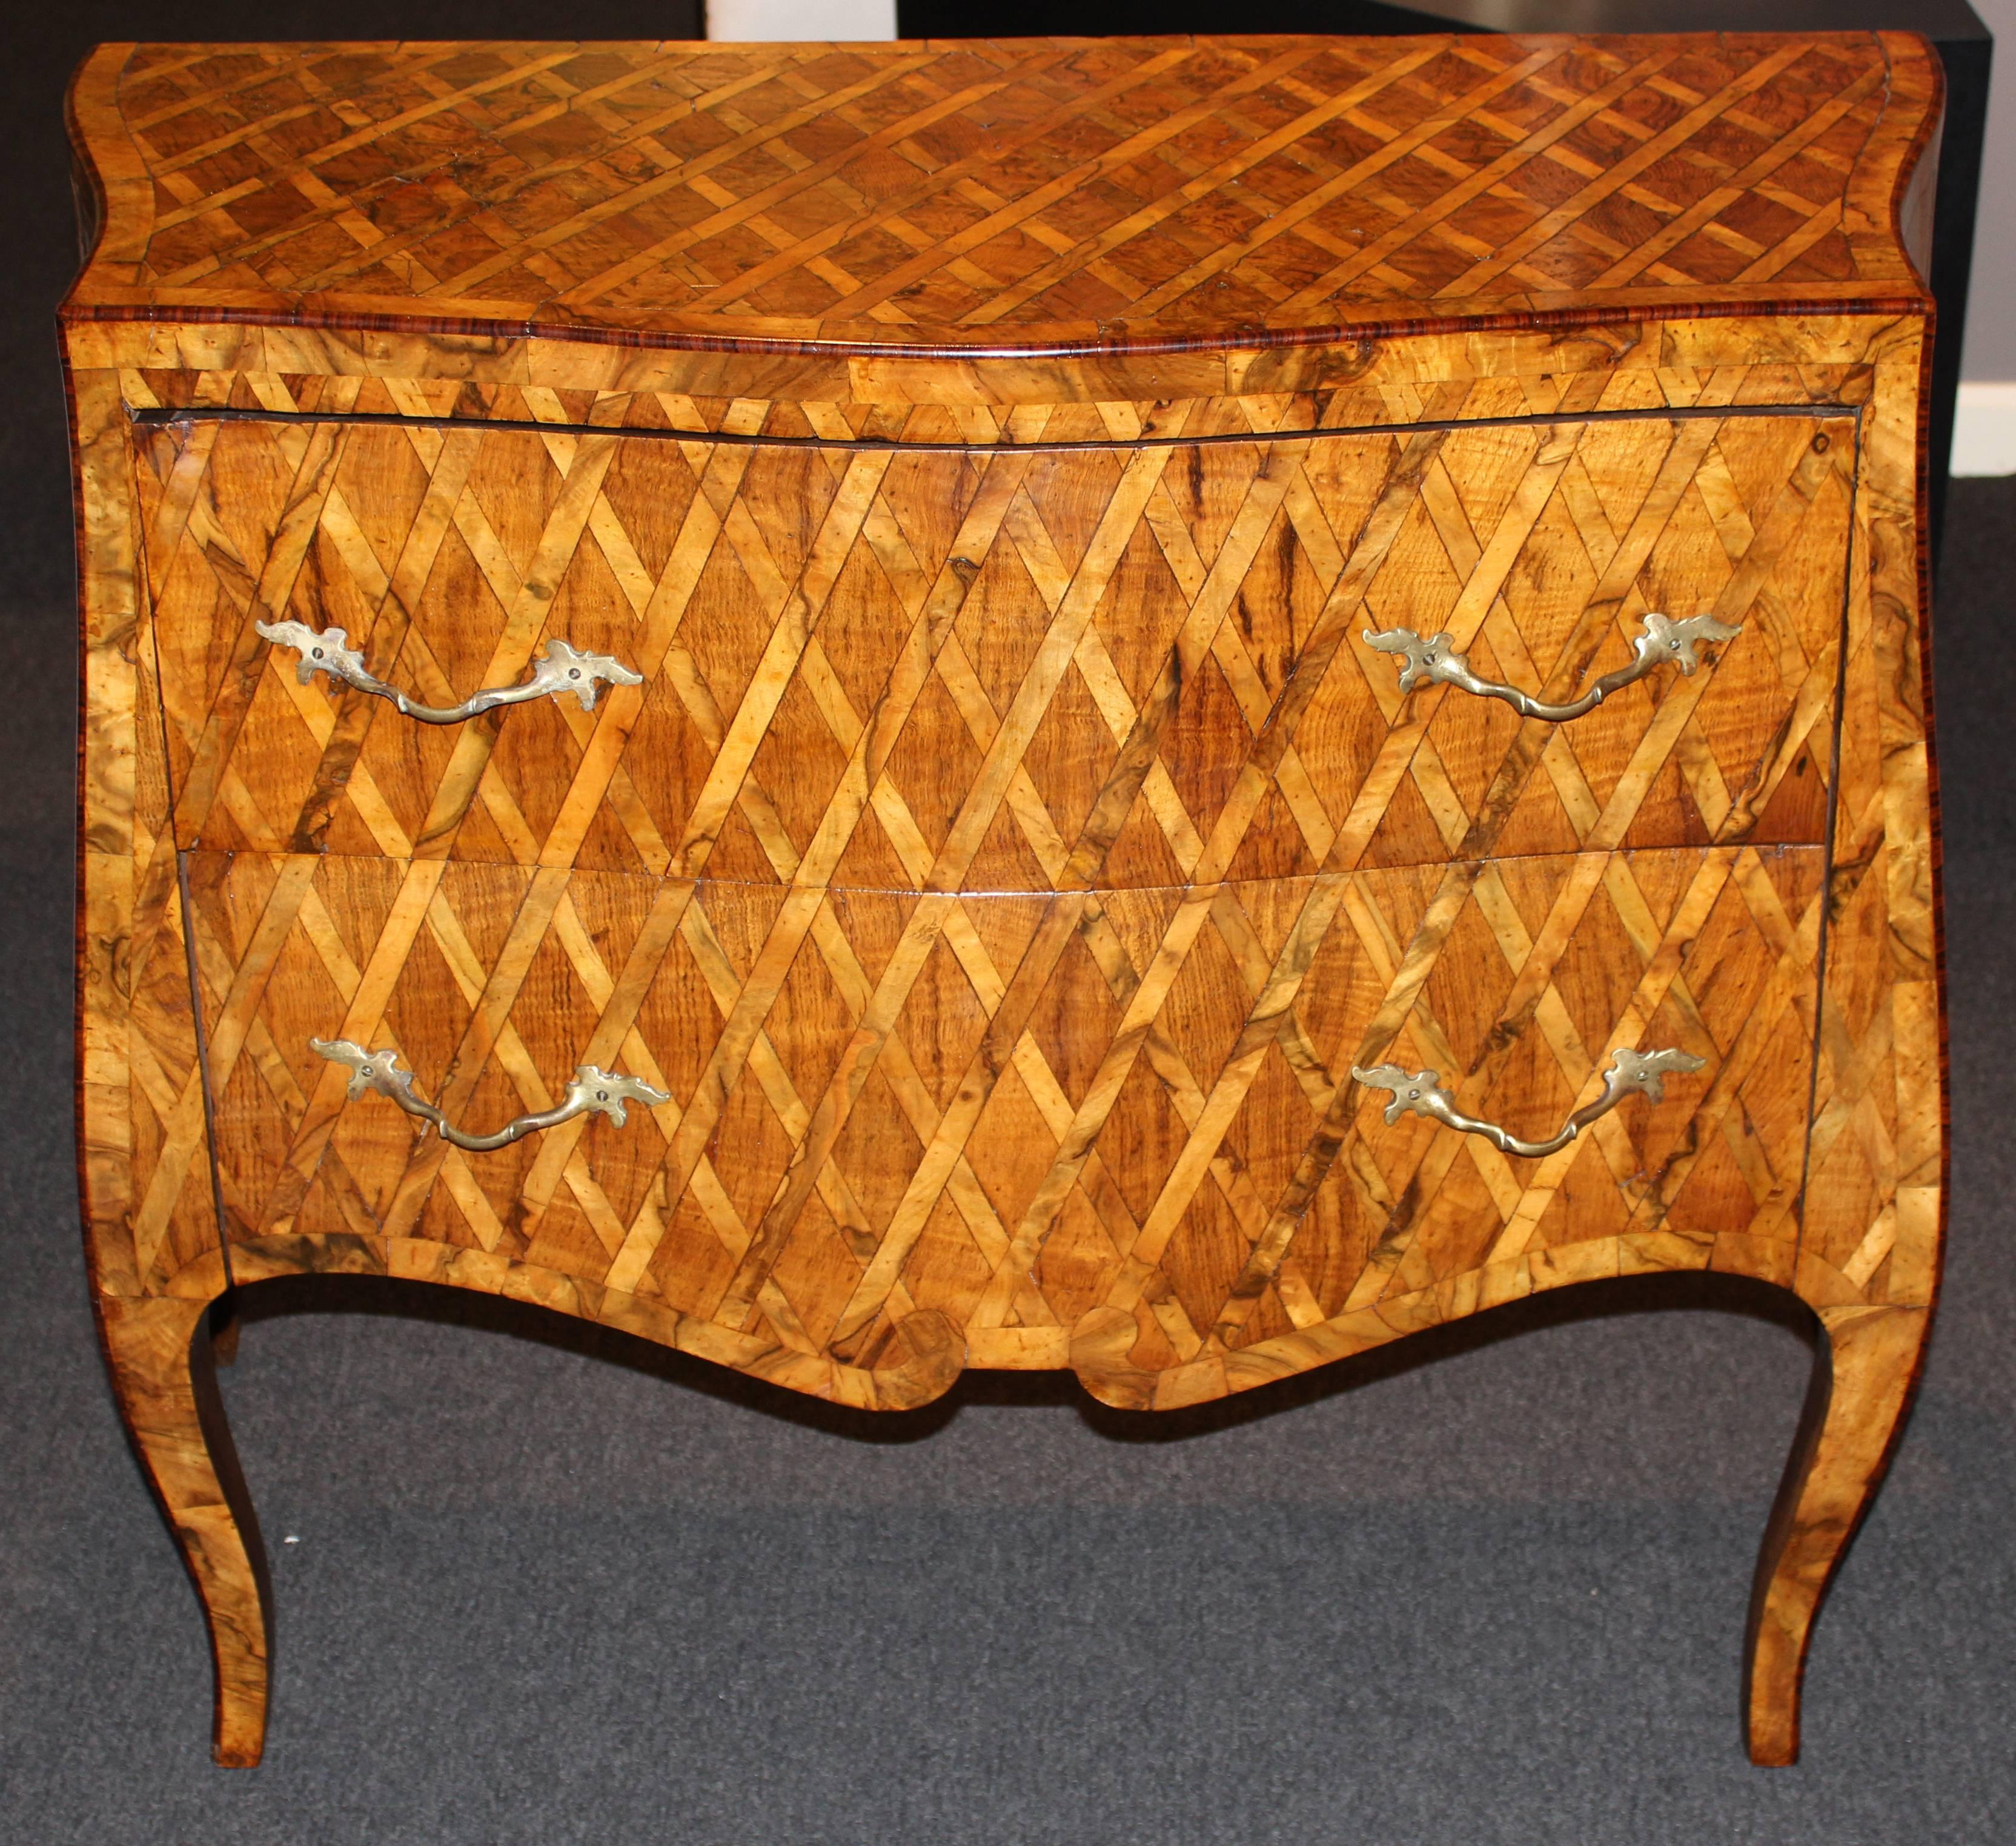 An exceptional Italian two-drawer fruitwood commode in serpentine form with conforming cross hatch and banded parquetry top with molded edges surmounting two long drawers with original brass pulls and continuing cross hatch parquetry and banded